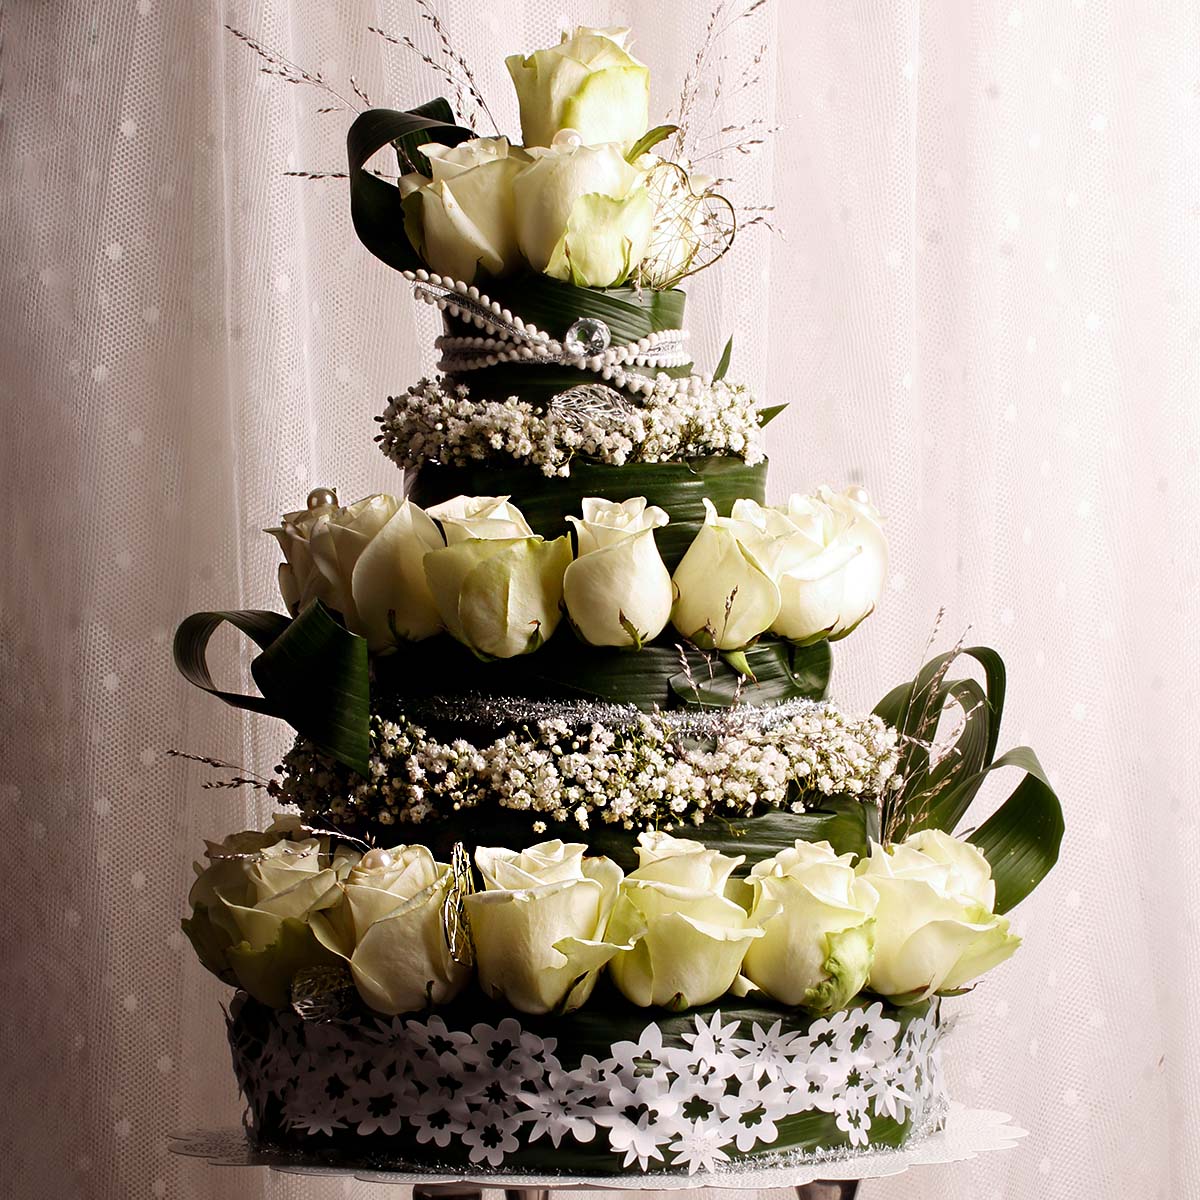 the-wedding-cake-featured